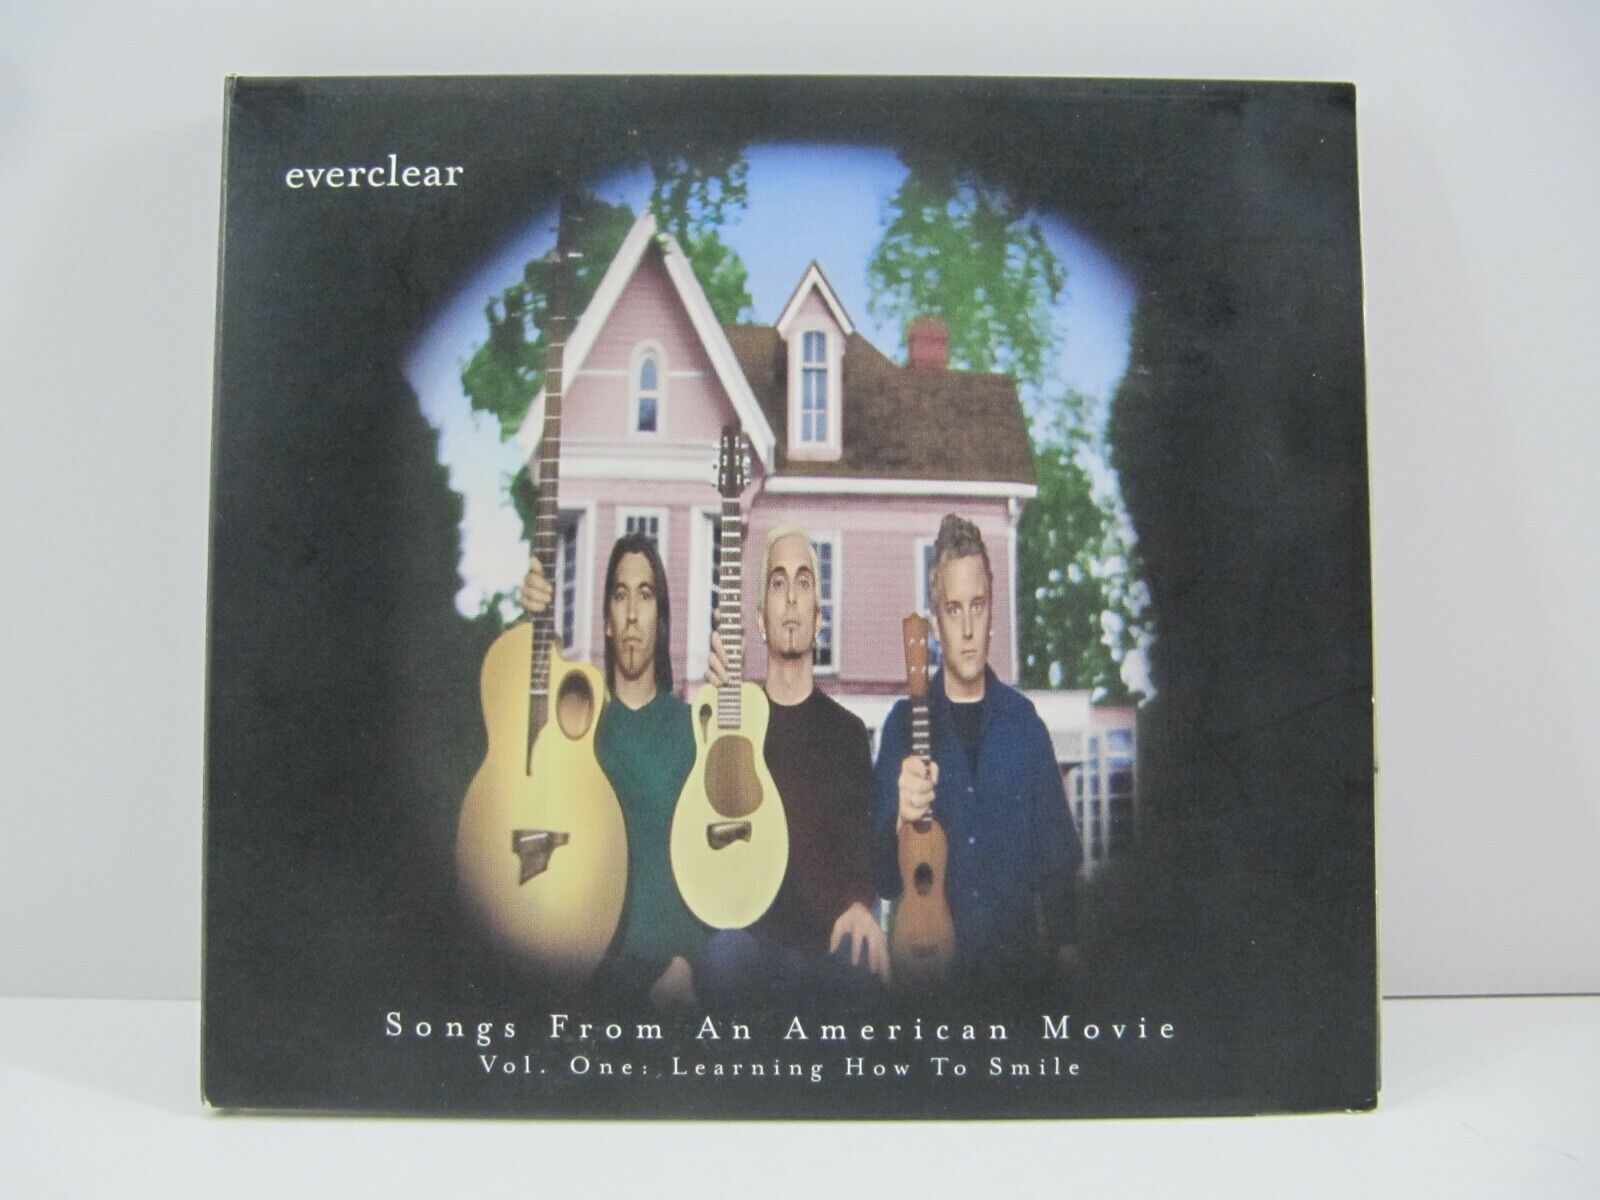 EVERCLEAR SONGS FROM AN AMERICAN MOVIE VOL. ONE CD 2000 CAPITOL RECORDS  VG+   